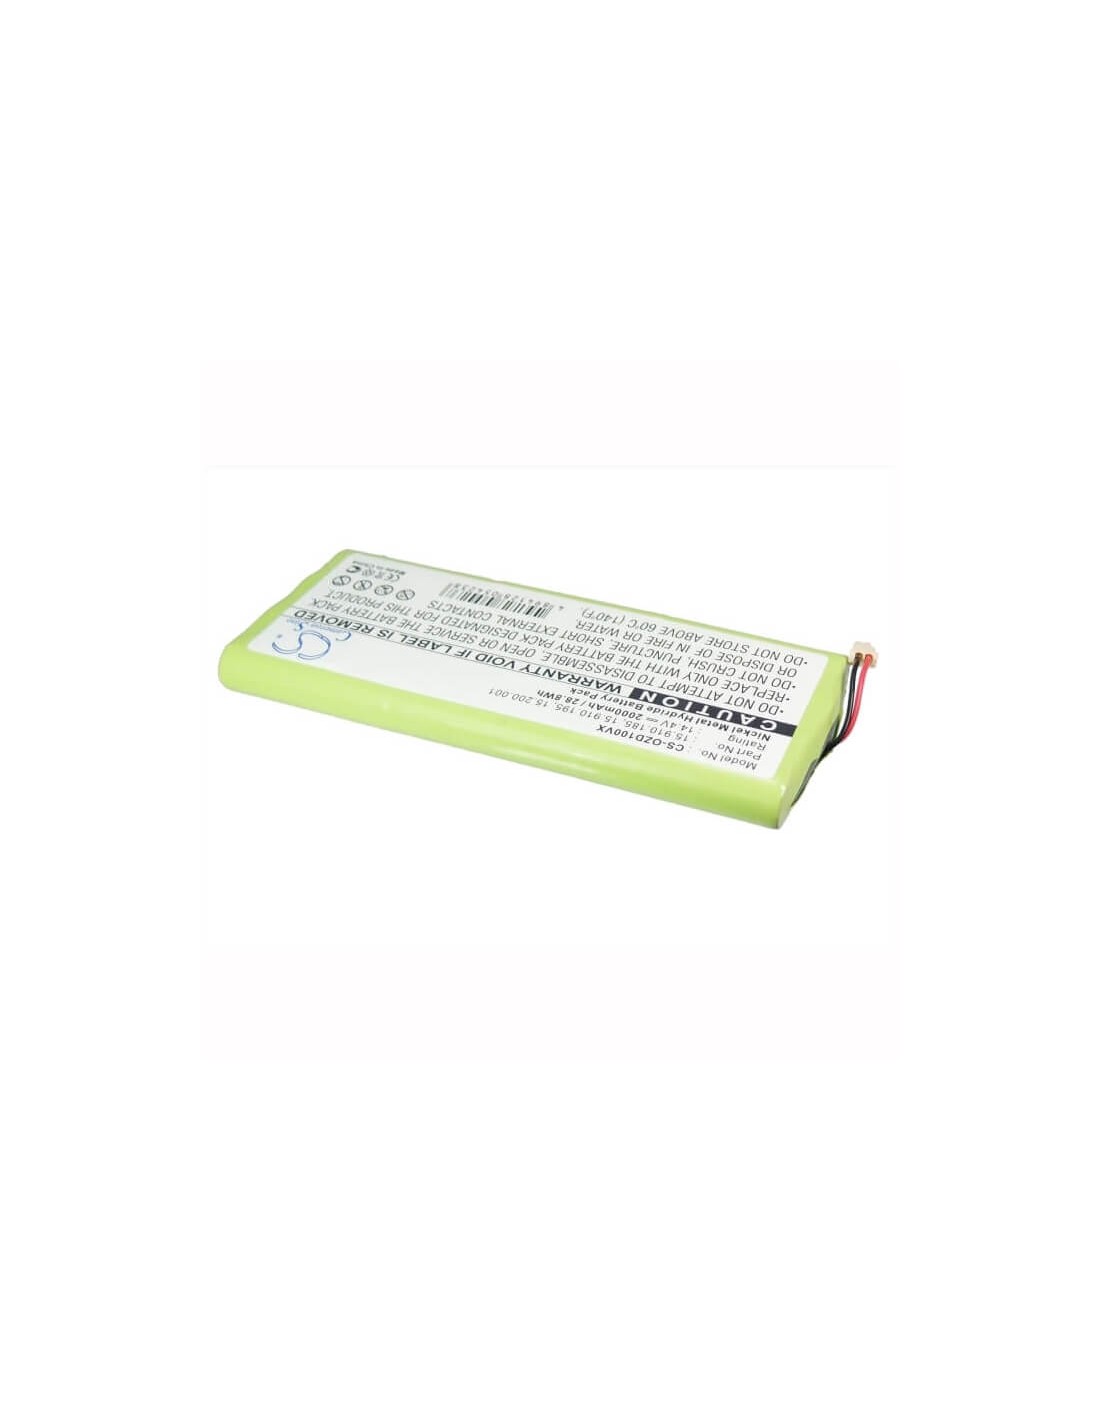 Battery for Ozroll Ods Controller, Smart Drive Smart Control 10 14.4V, 2000mAh - 28.80Wh